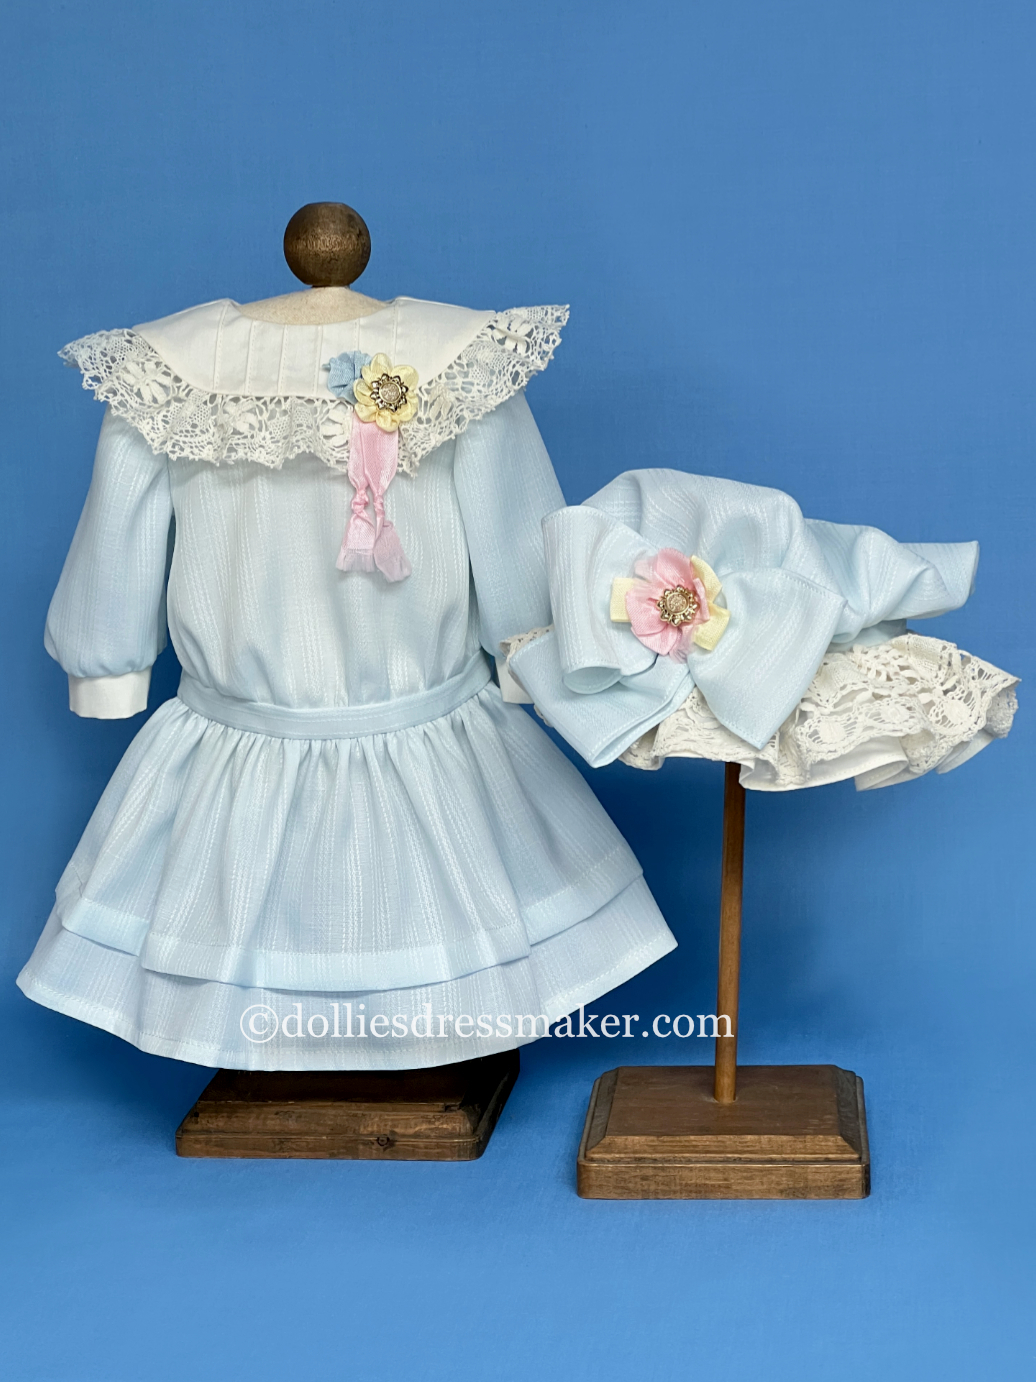 Dress with Bertha Collar and Mob Cap | American Girl Doll Samantha • Nellie